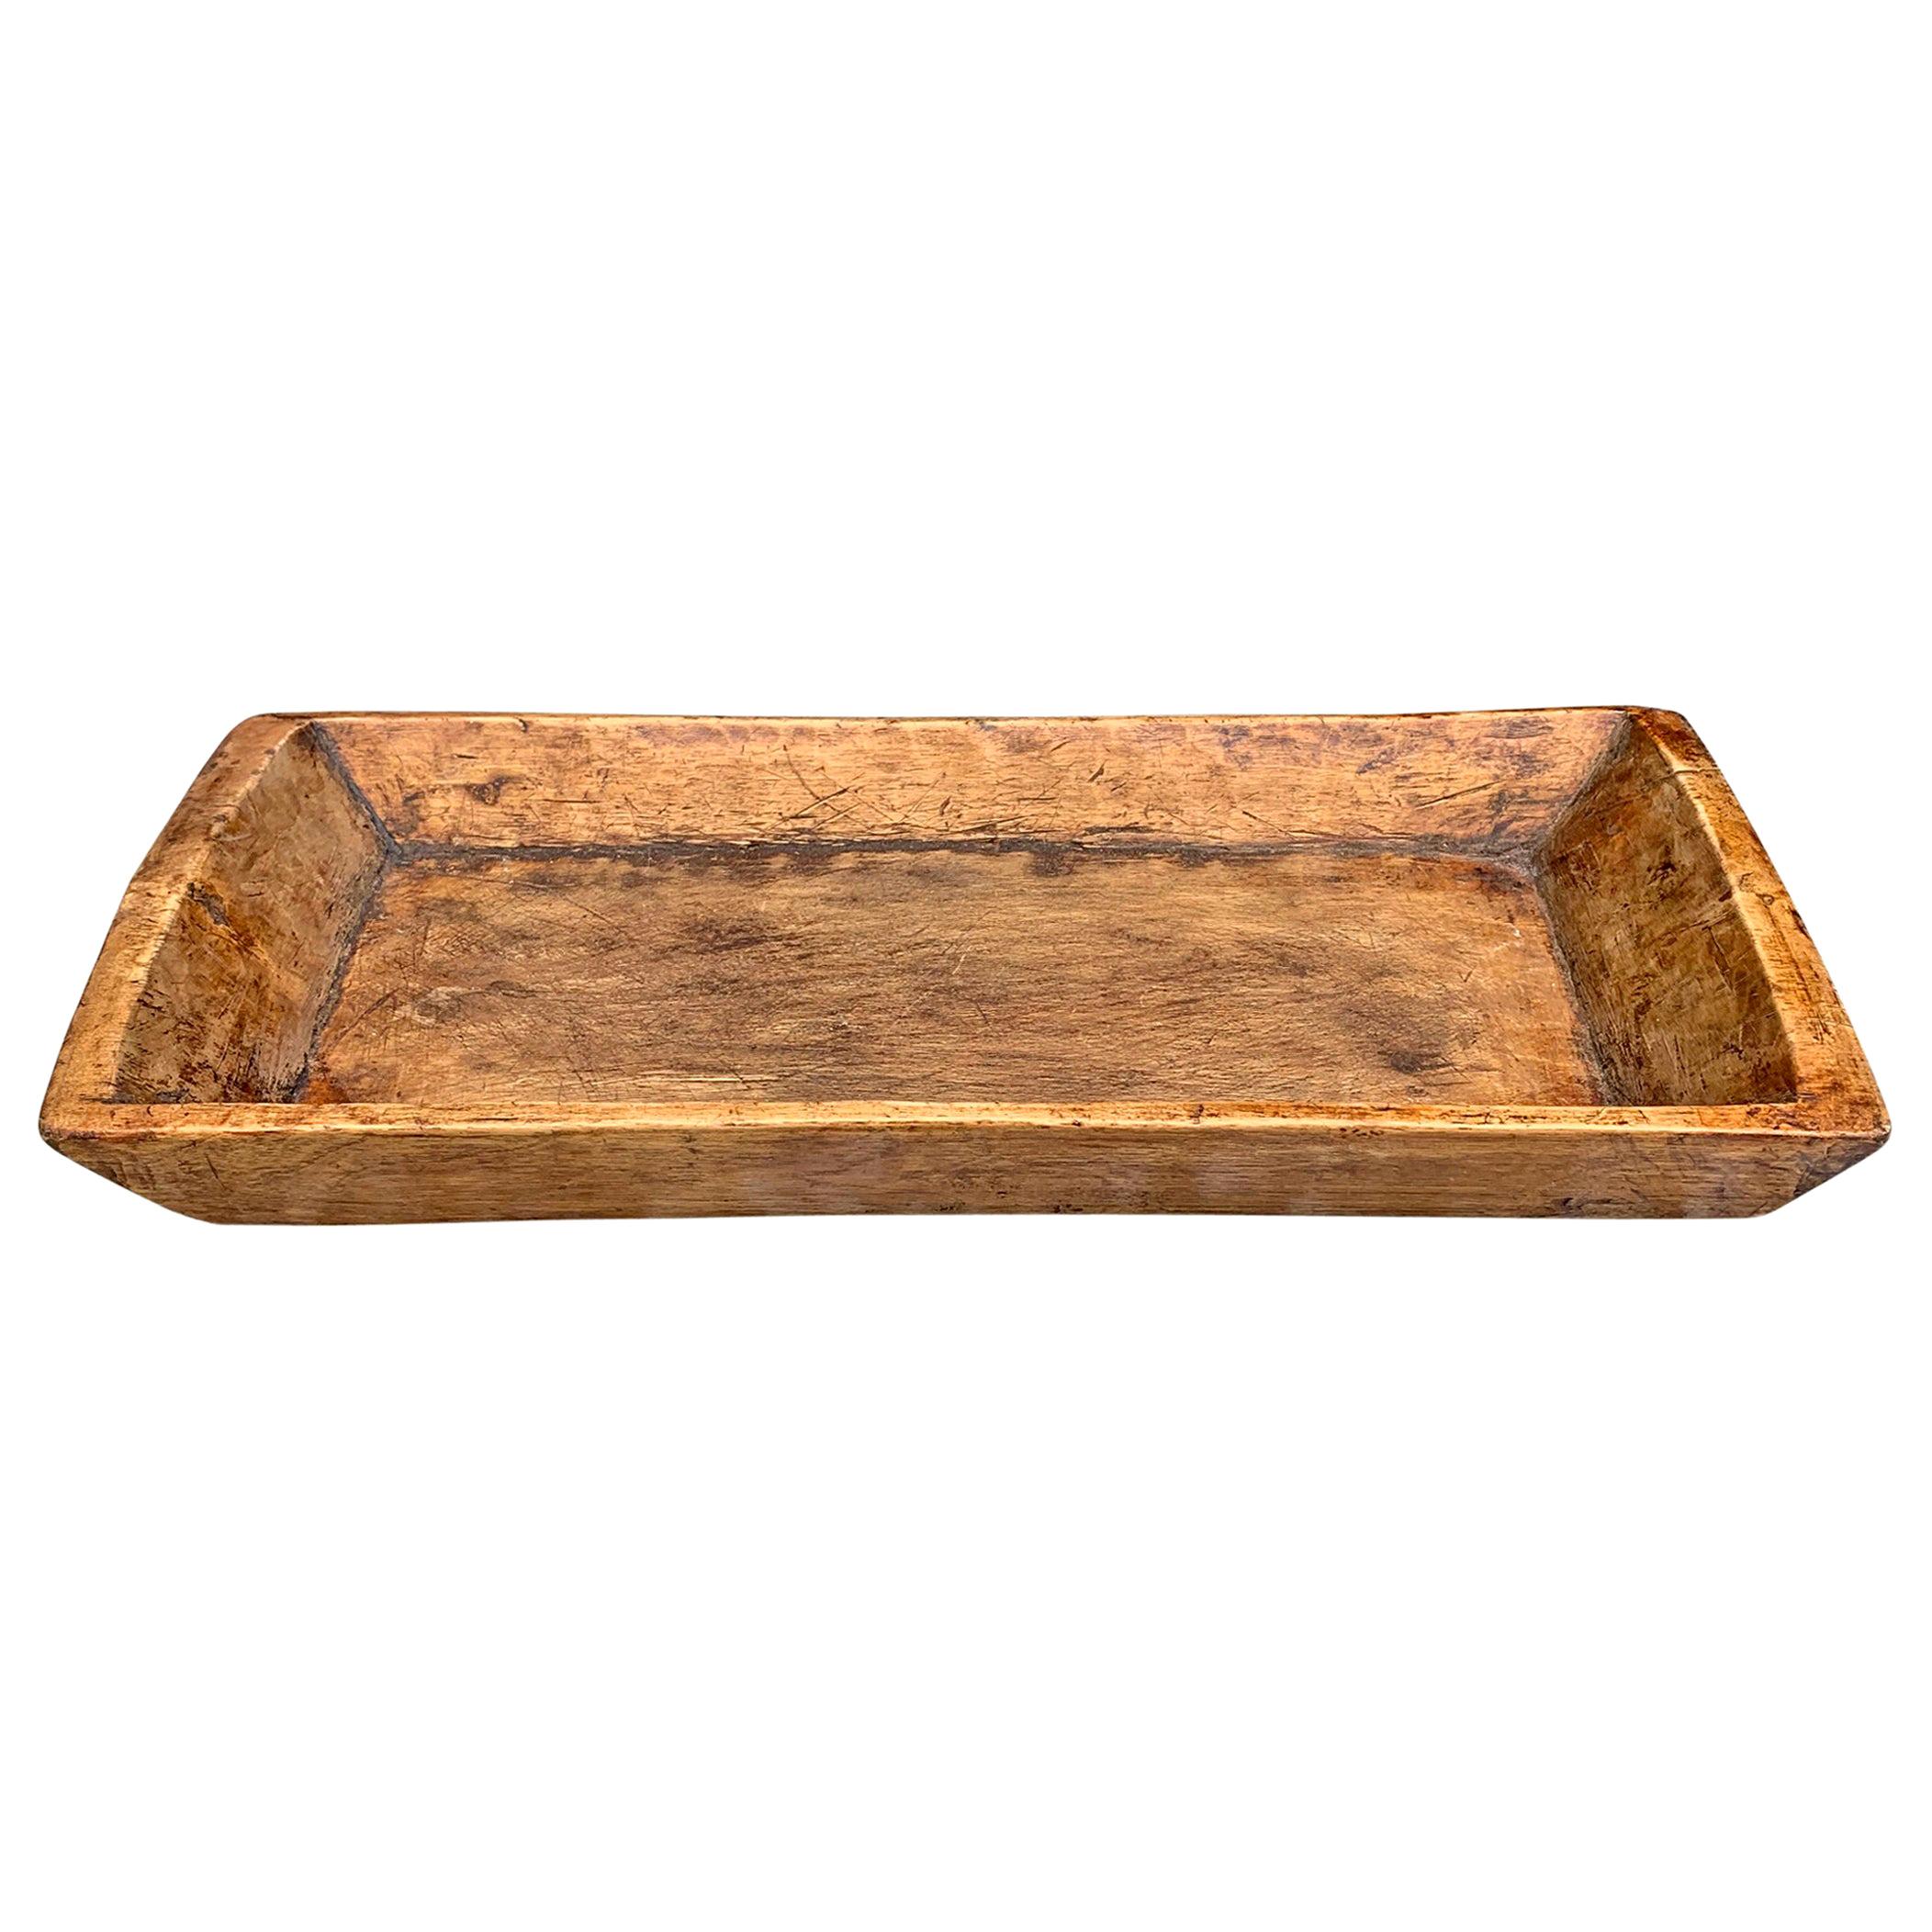 Wooden Serving Tray 40 cm x 30 cm x 5.5 cm in Light Brown Color 